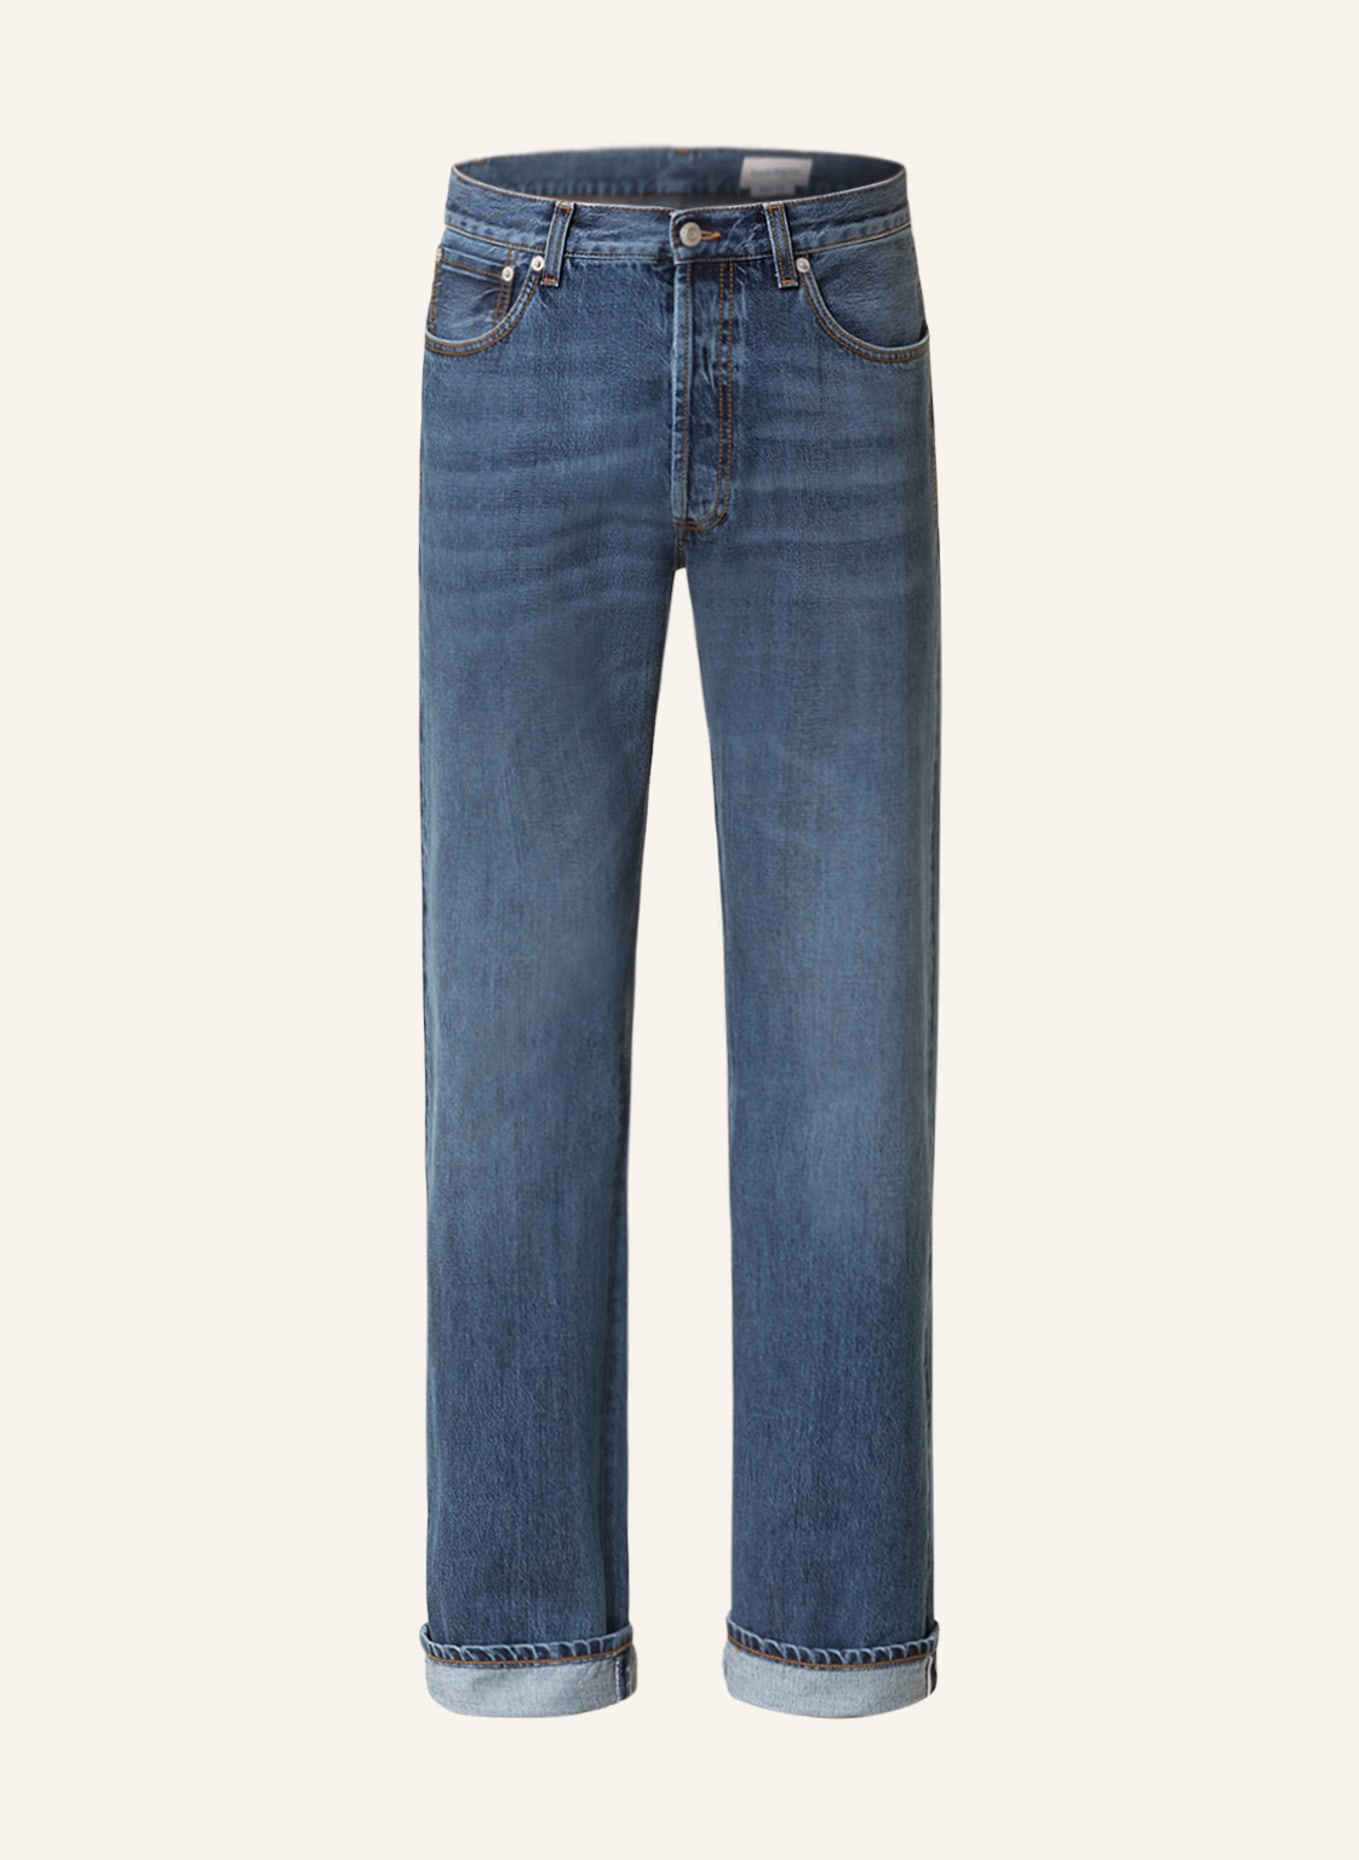 Alexander McQUEEN Jeans Straight Fit, Farbe: 4001 BLUE WASHED (Bild 1)